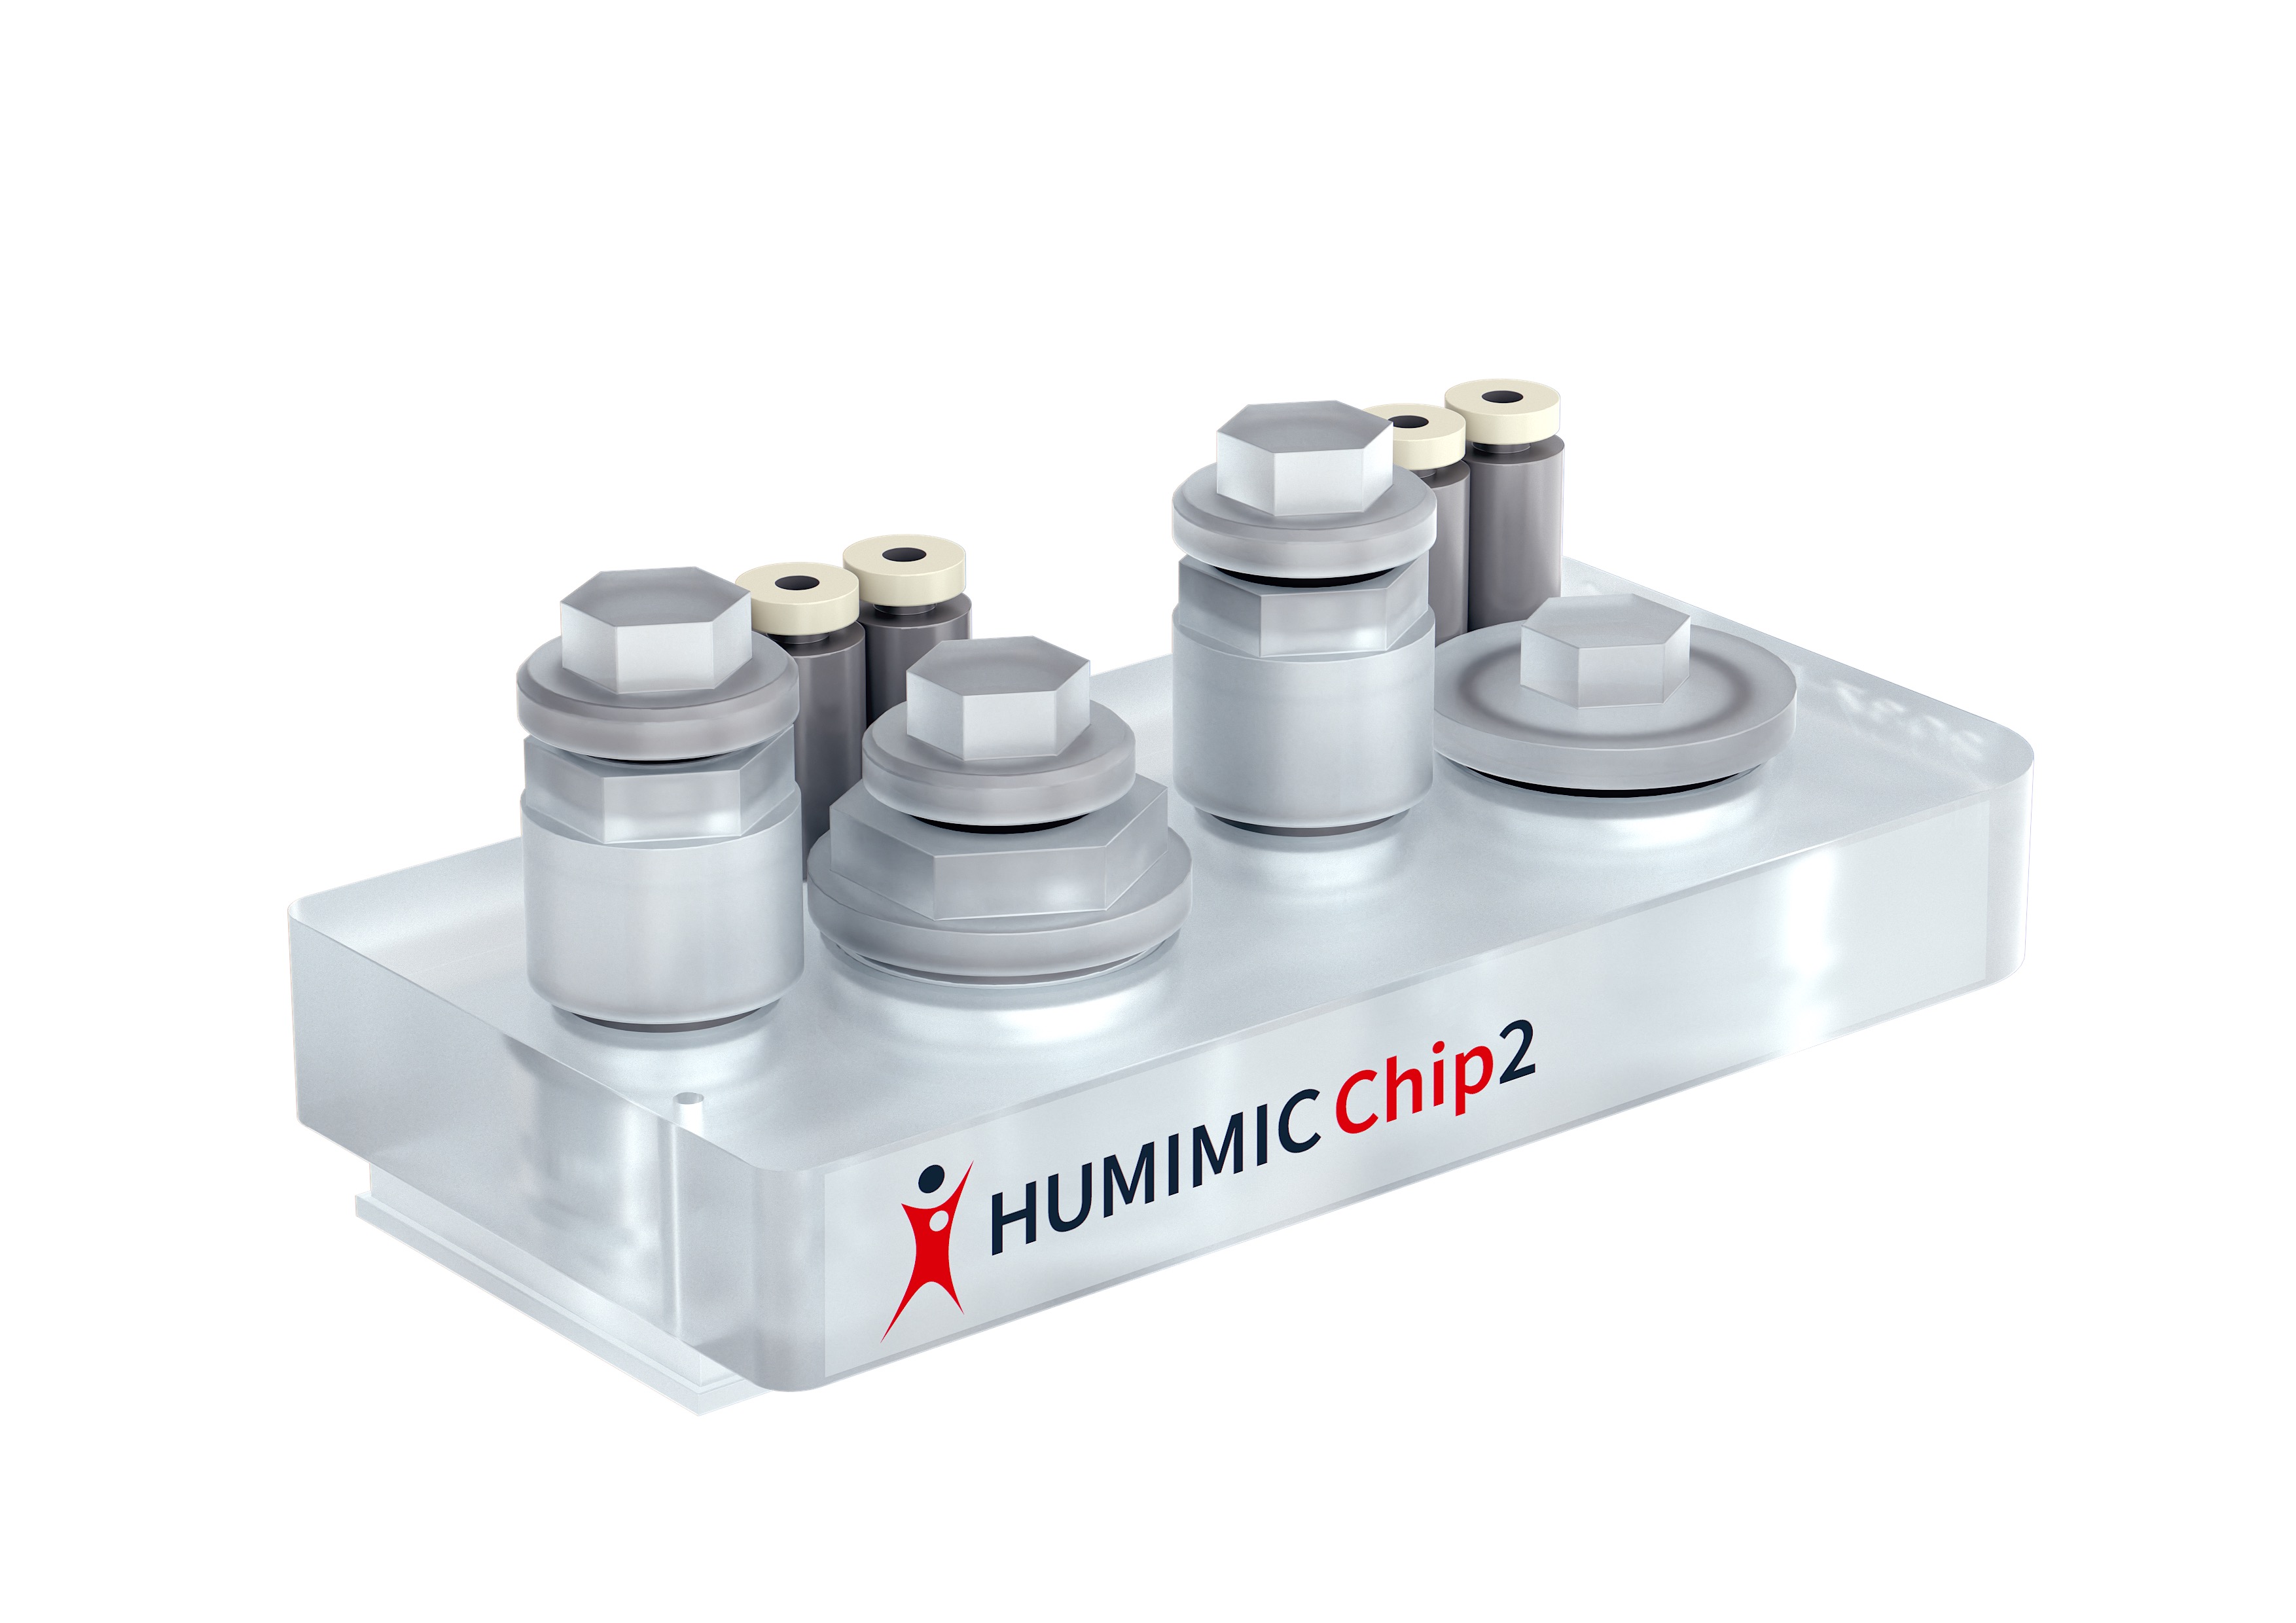 HUMIMIC Chip3 and HUMIMIC Chip3plus The HUMIMIC Chip3 is designed for the simultaneous cultivation of up to three organ models in a common microfluidic circuit. The HUMIMIC Chip3 und HUMIMIC Chip3plus have all the advantages as the HUMIMIC Chip2 while allowing the culture of an additional organ model.